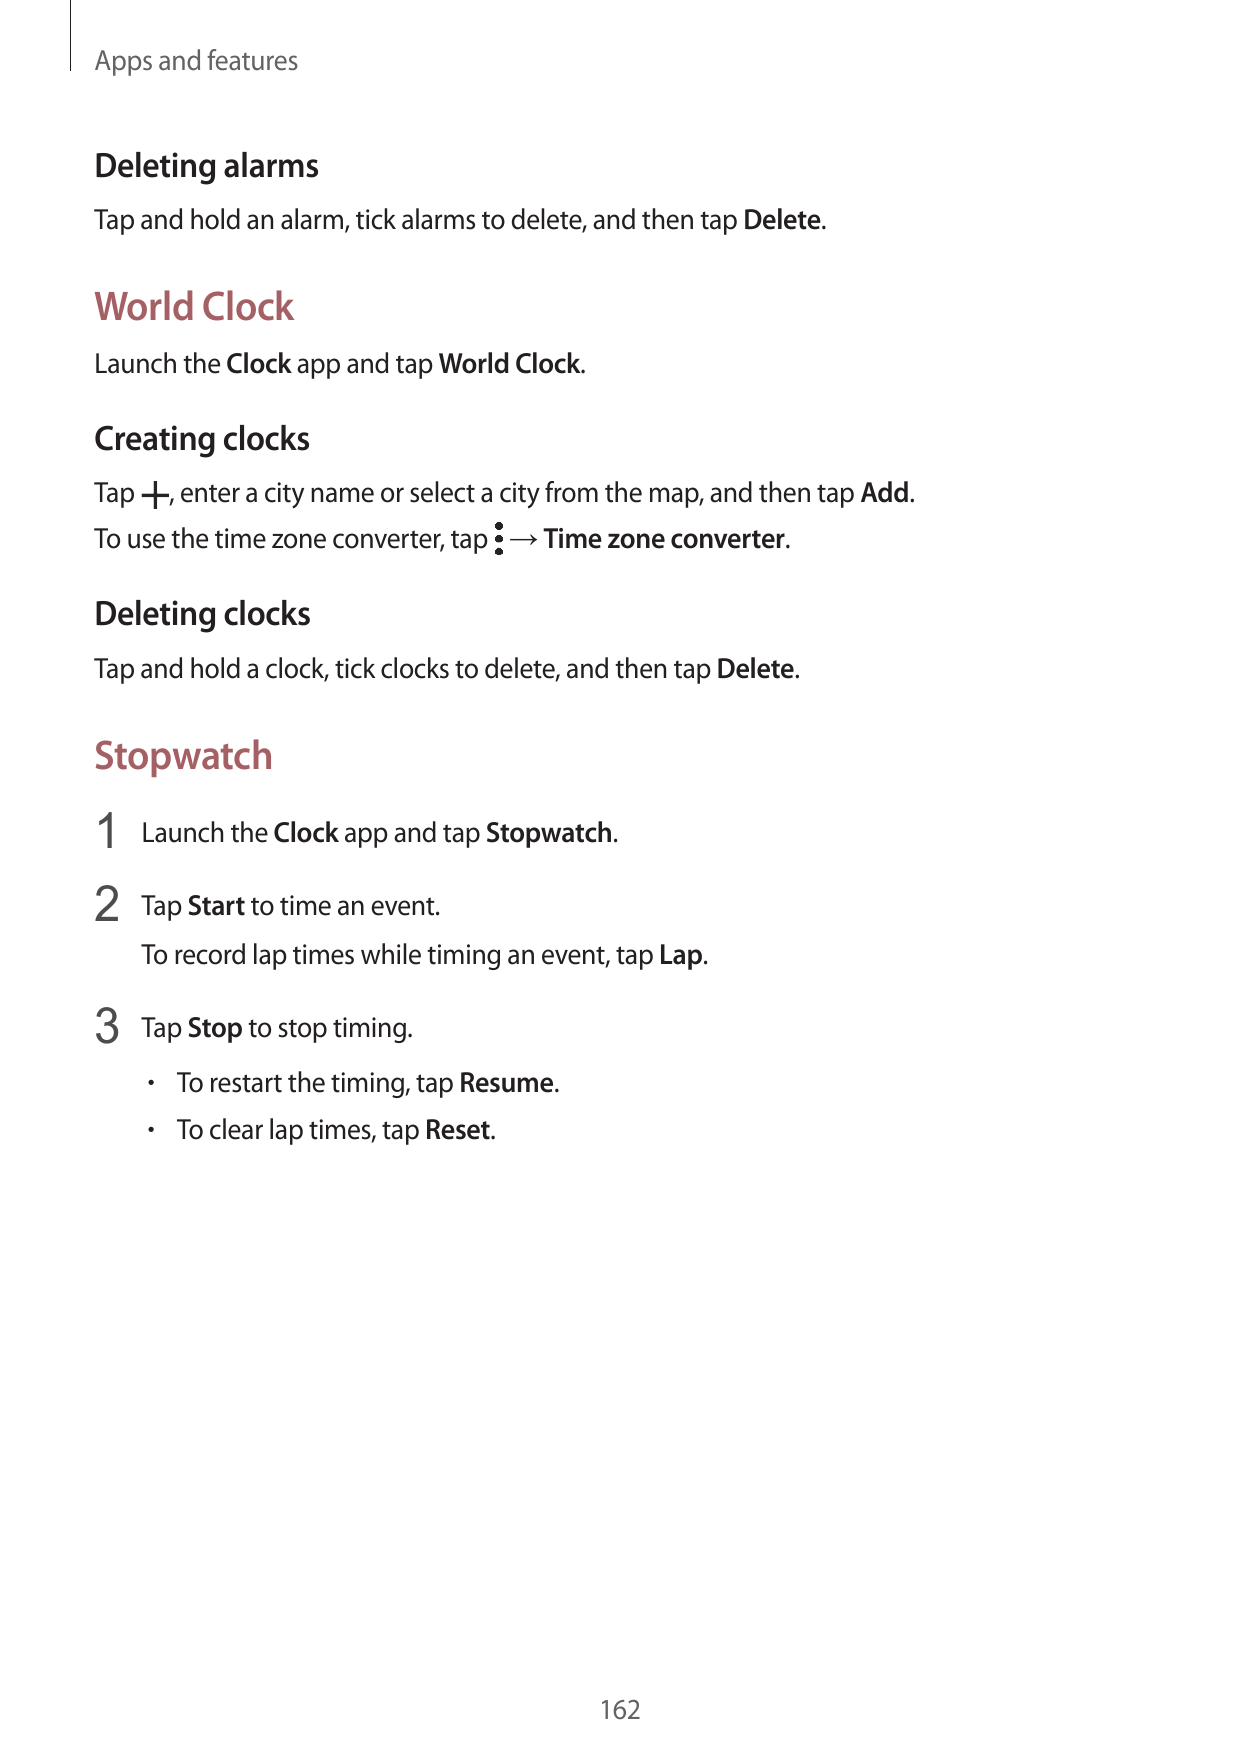 Apps and featuresDeleting alarmsTap and hold an alarm, tick alarms to delete, and then tap Delete.World ClockLaunch the Clock ap